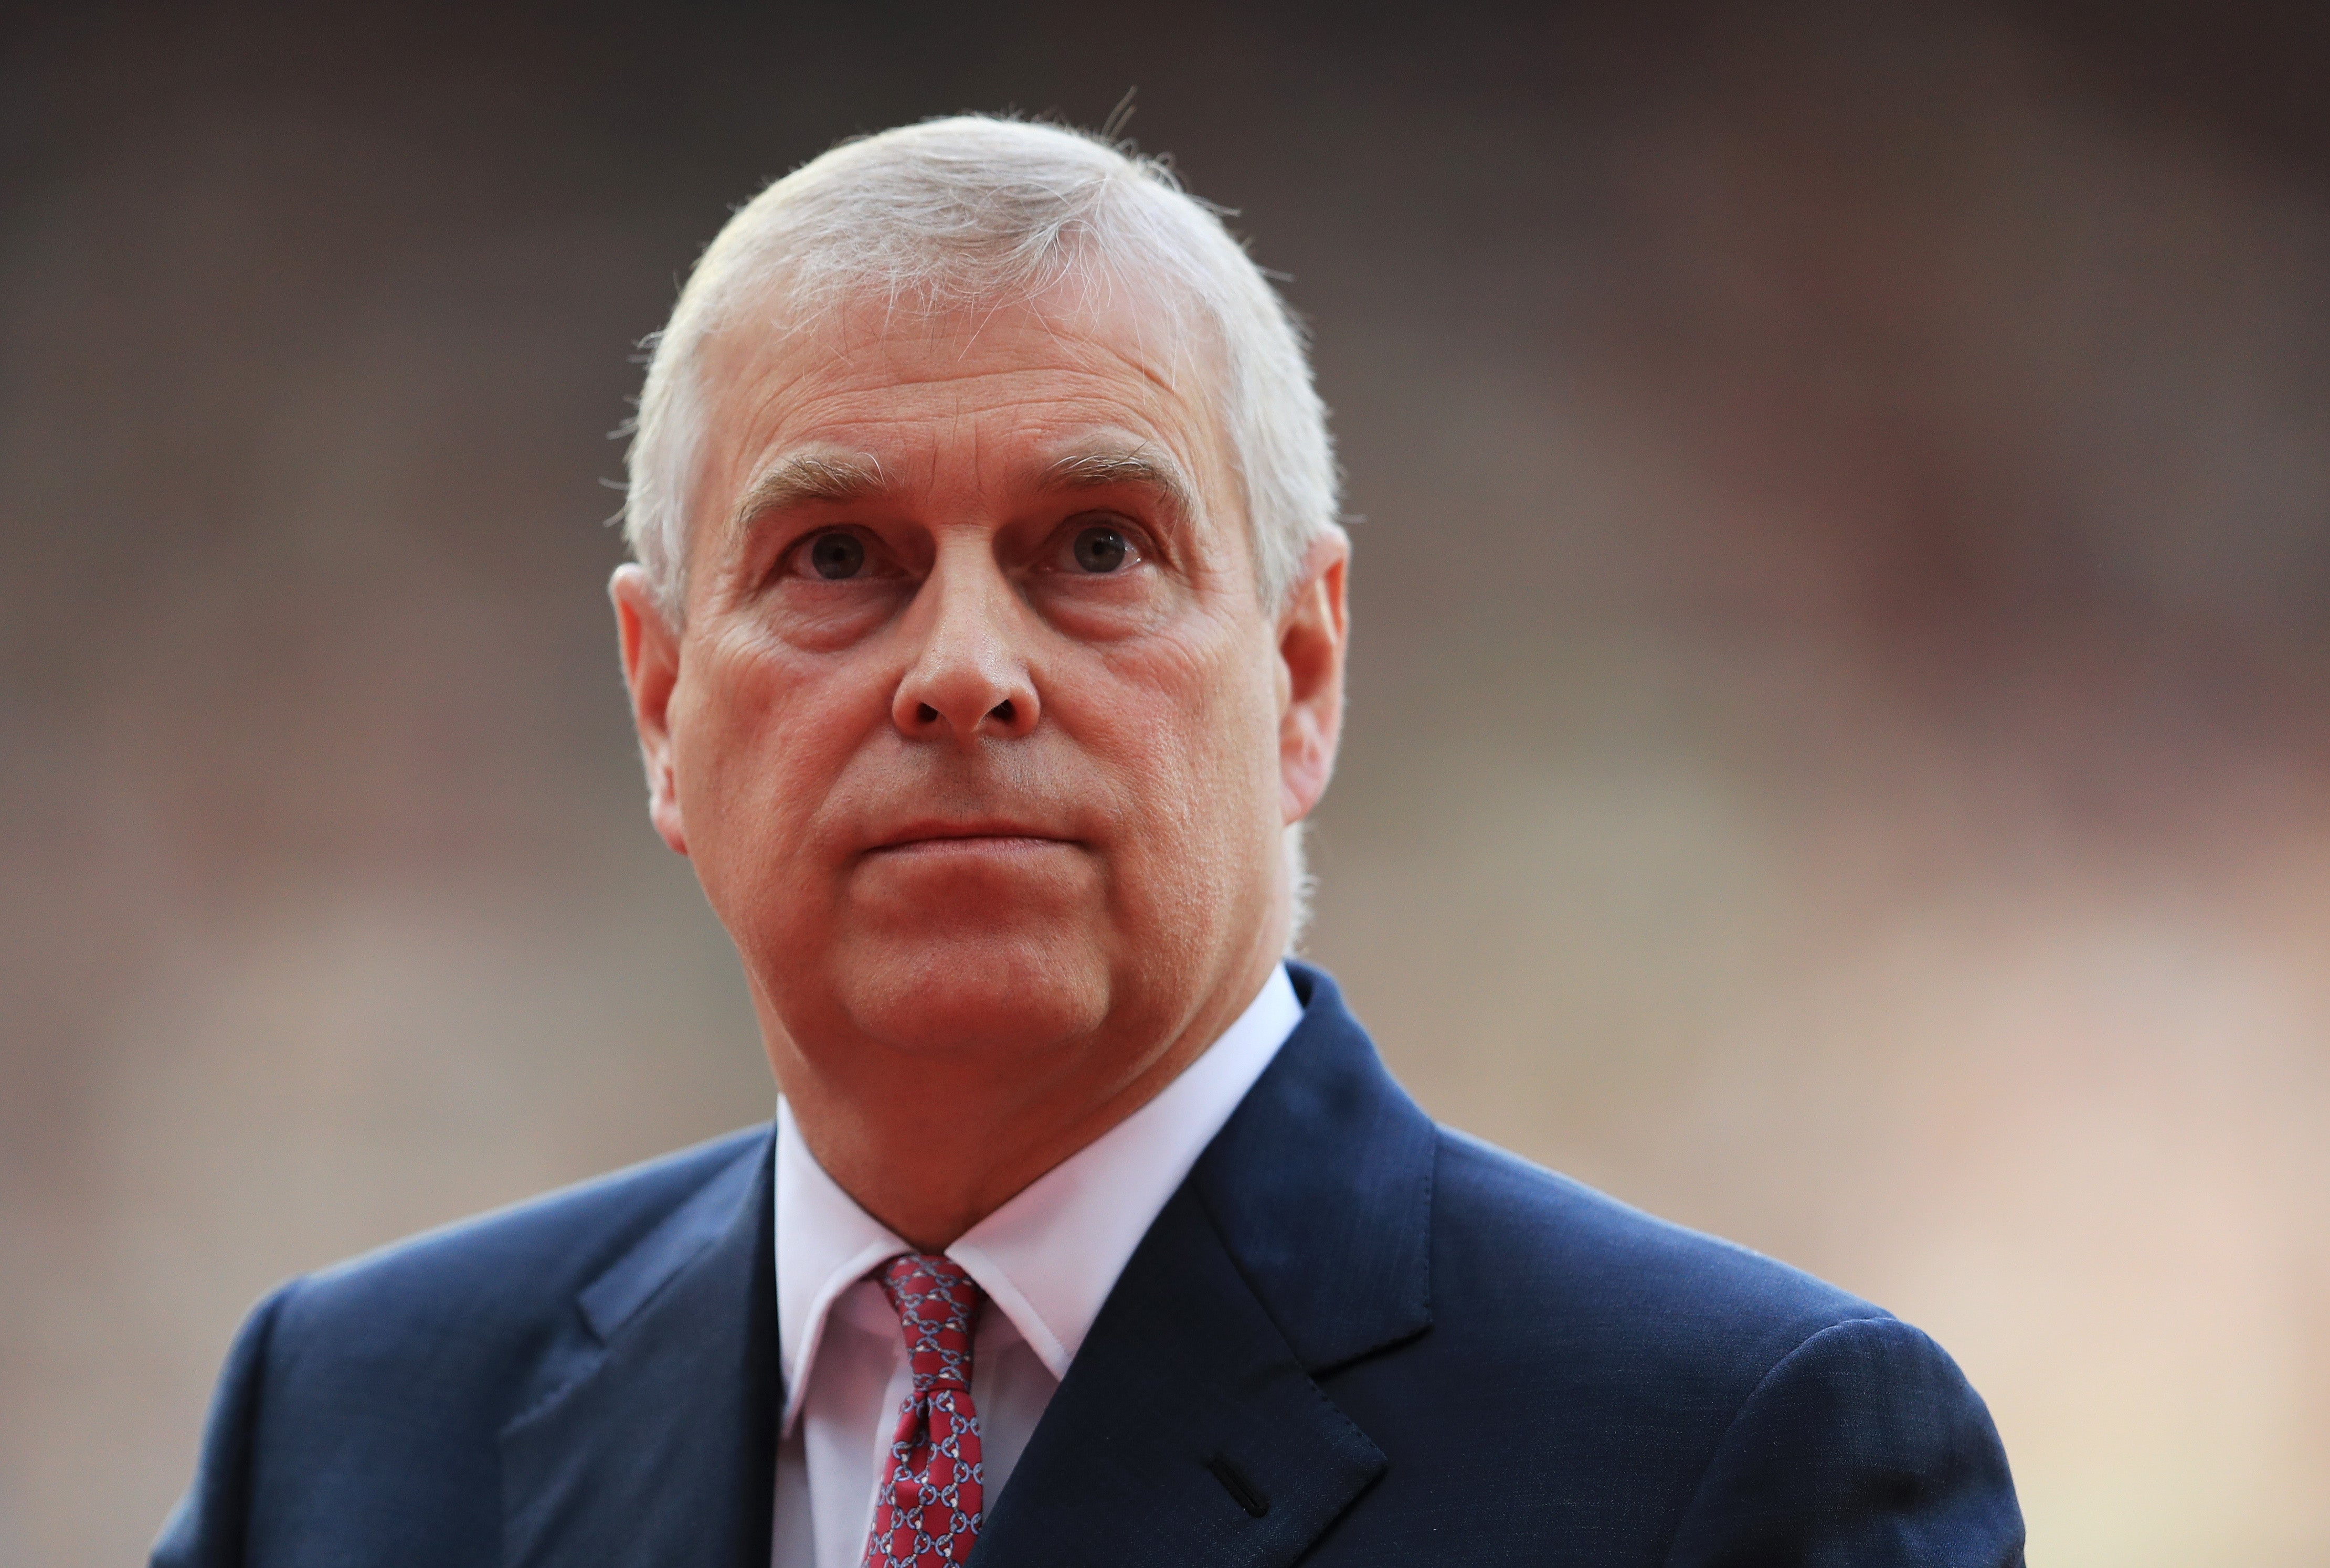 The Duke of York had been due to give a deposition on 10 March in a ‘neutral location’ in London